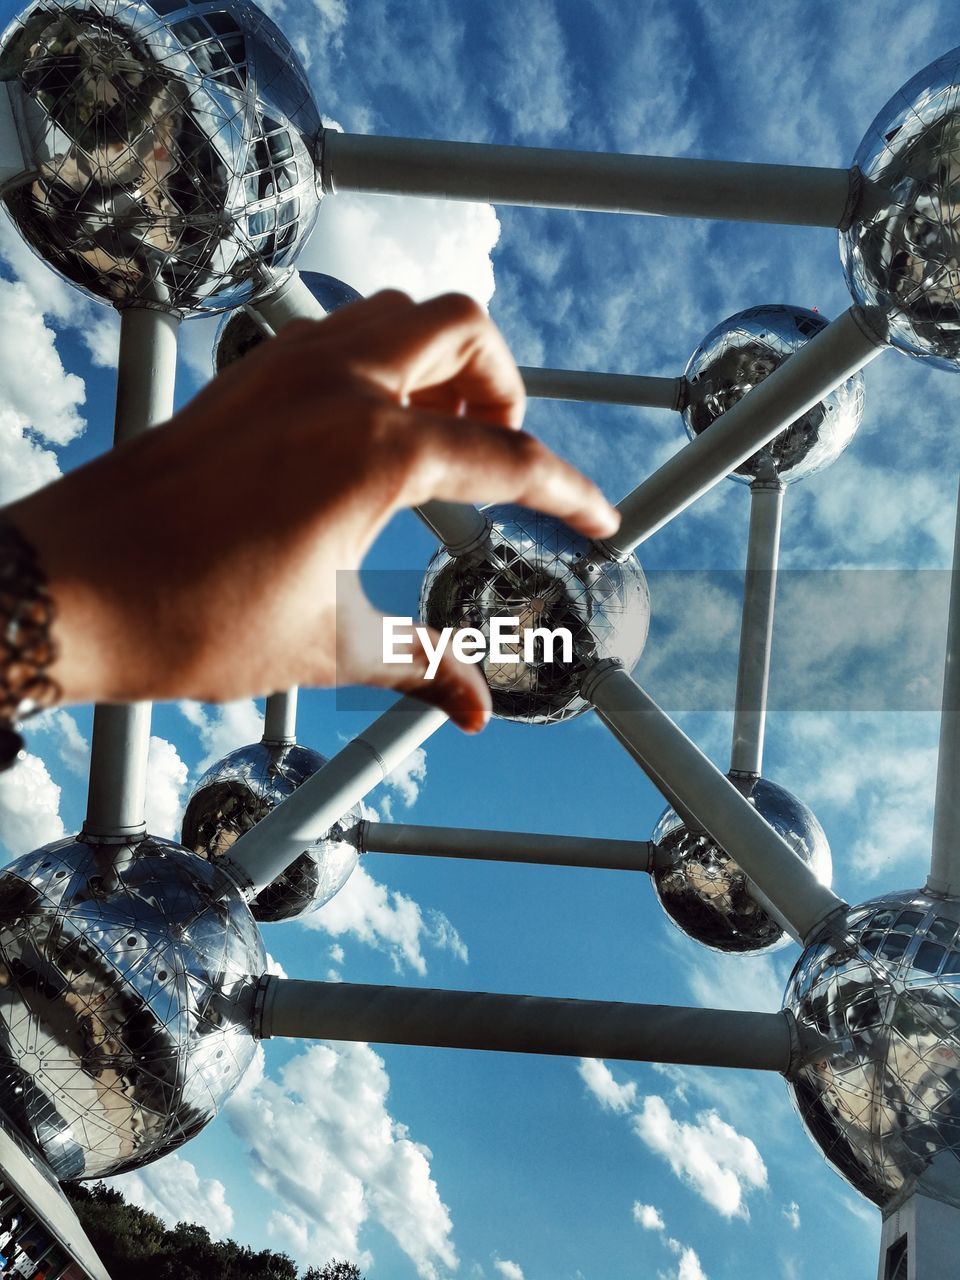 LOW ANGLE VIEW OF PERSON HAND HOLDING METALLIC STRUCTURE AGAINST SKY